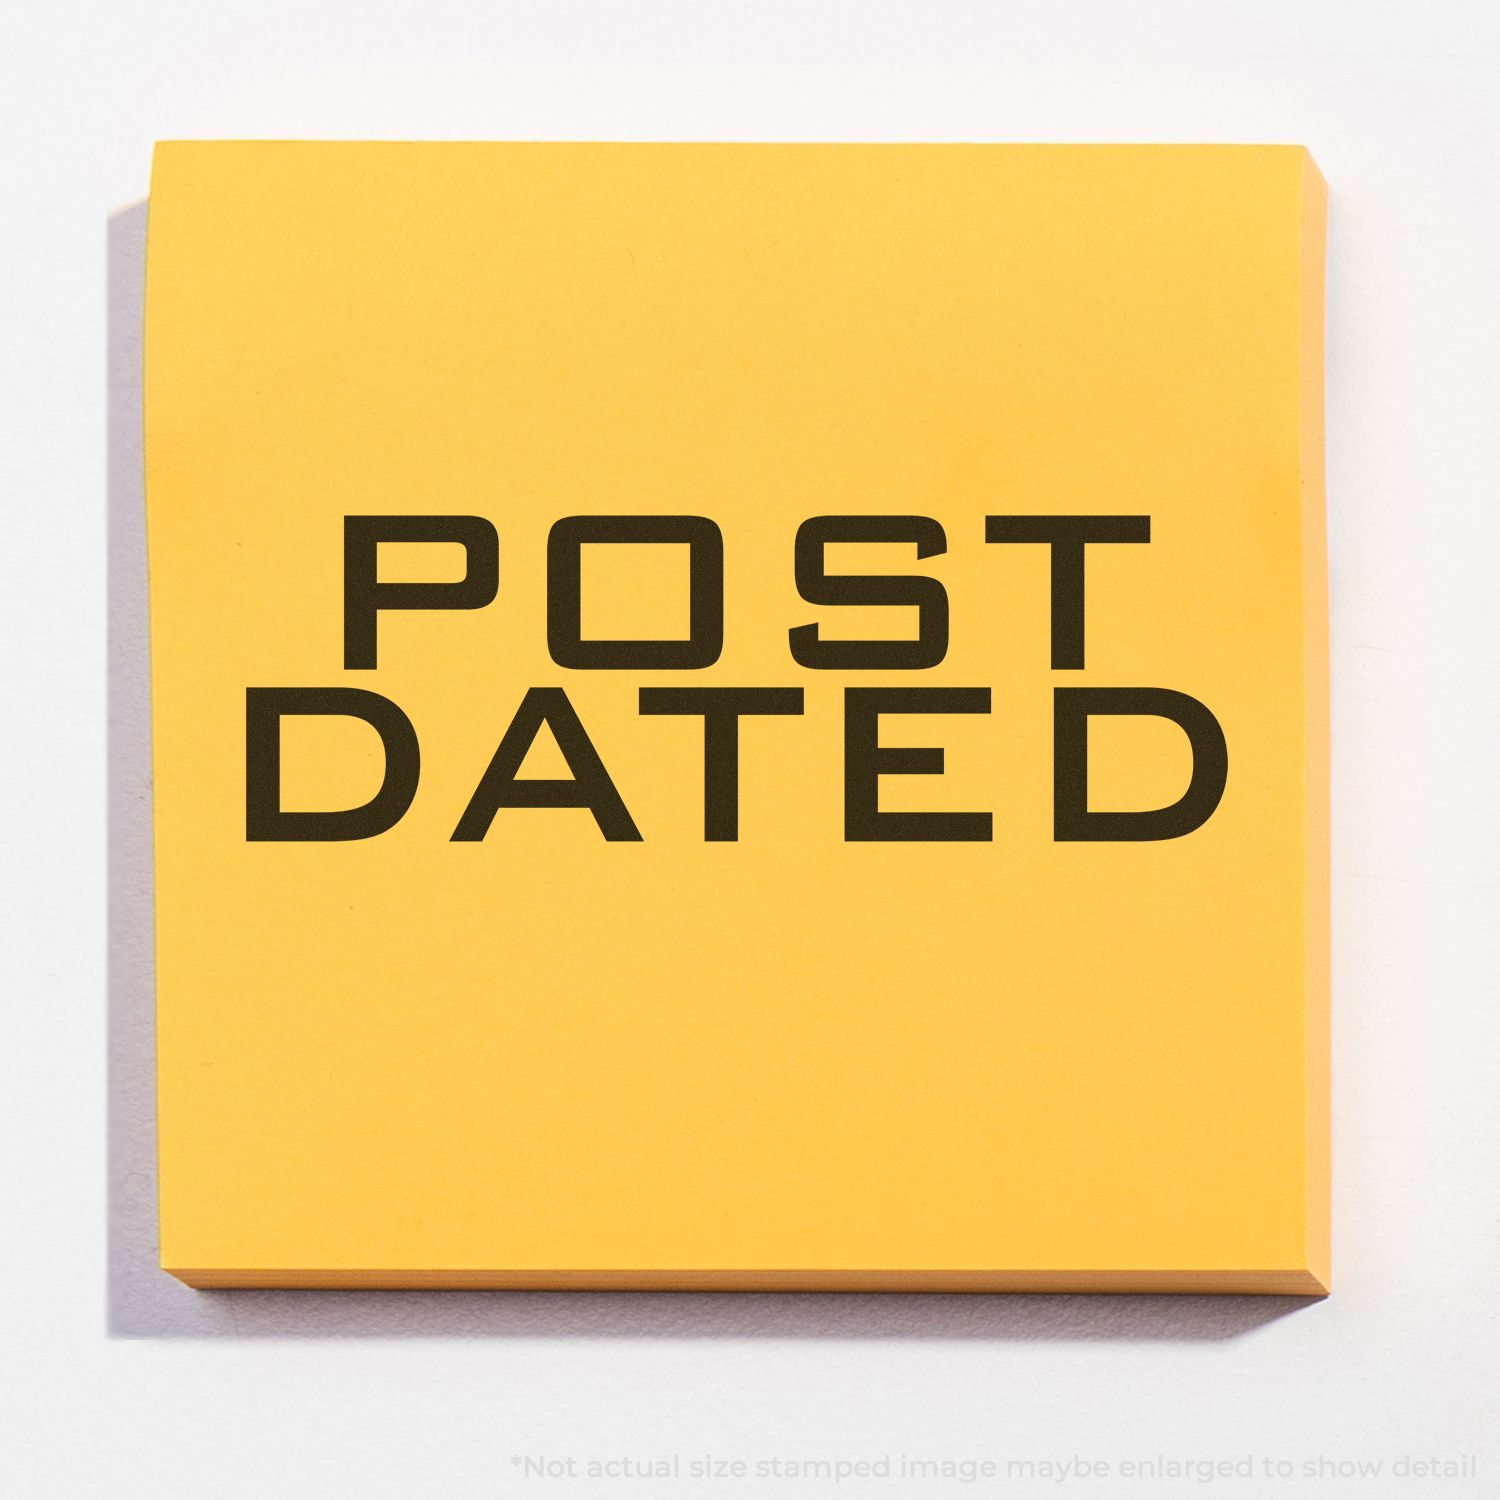 A self-inking stamp with a stamped image showing how the text "POST DATED" is displayed after stamping.